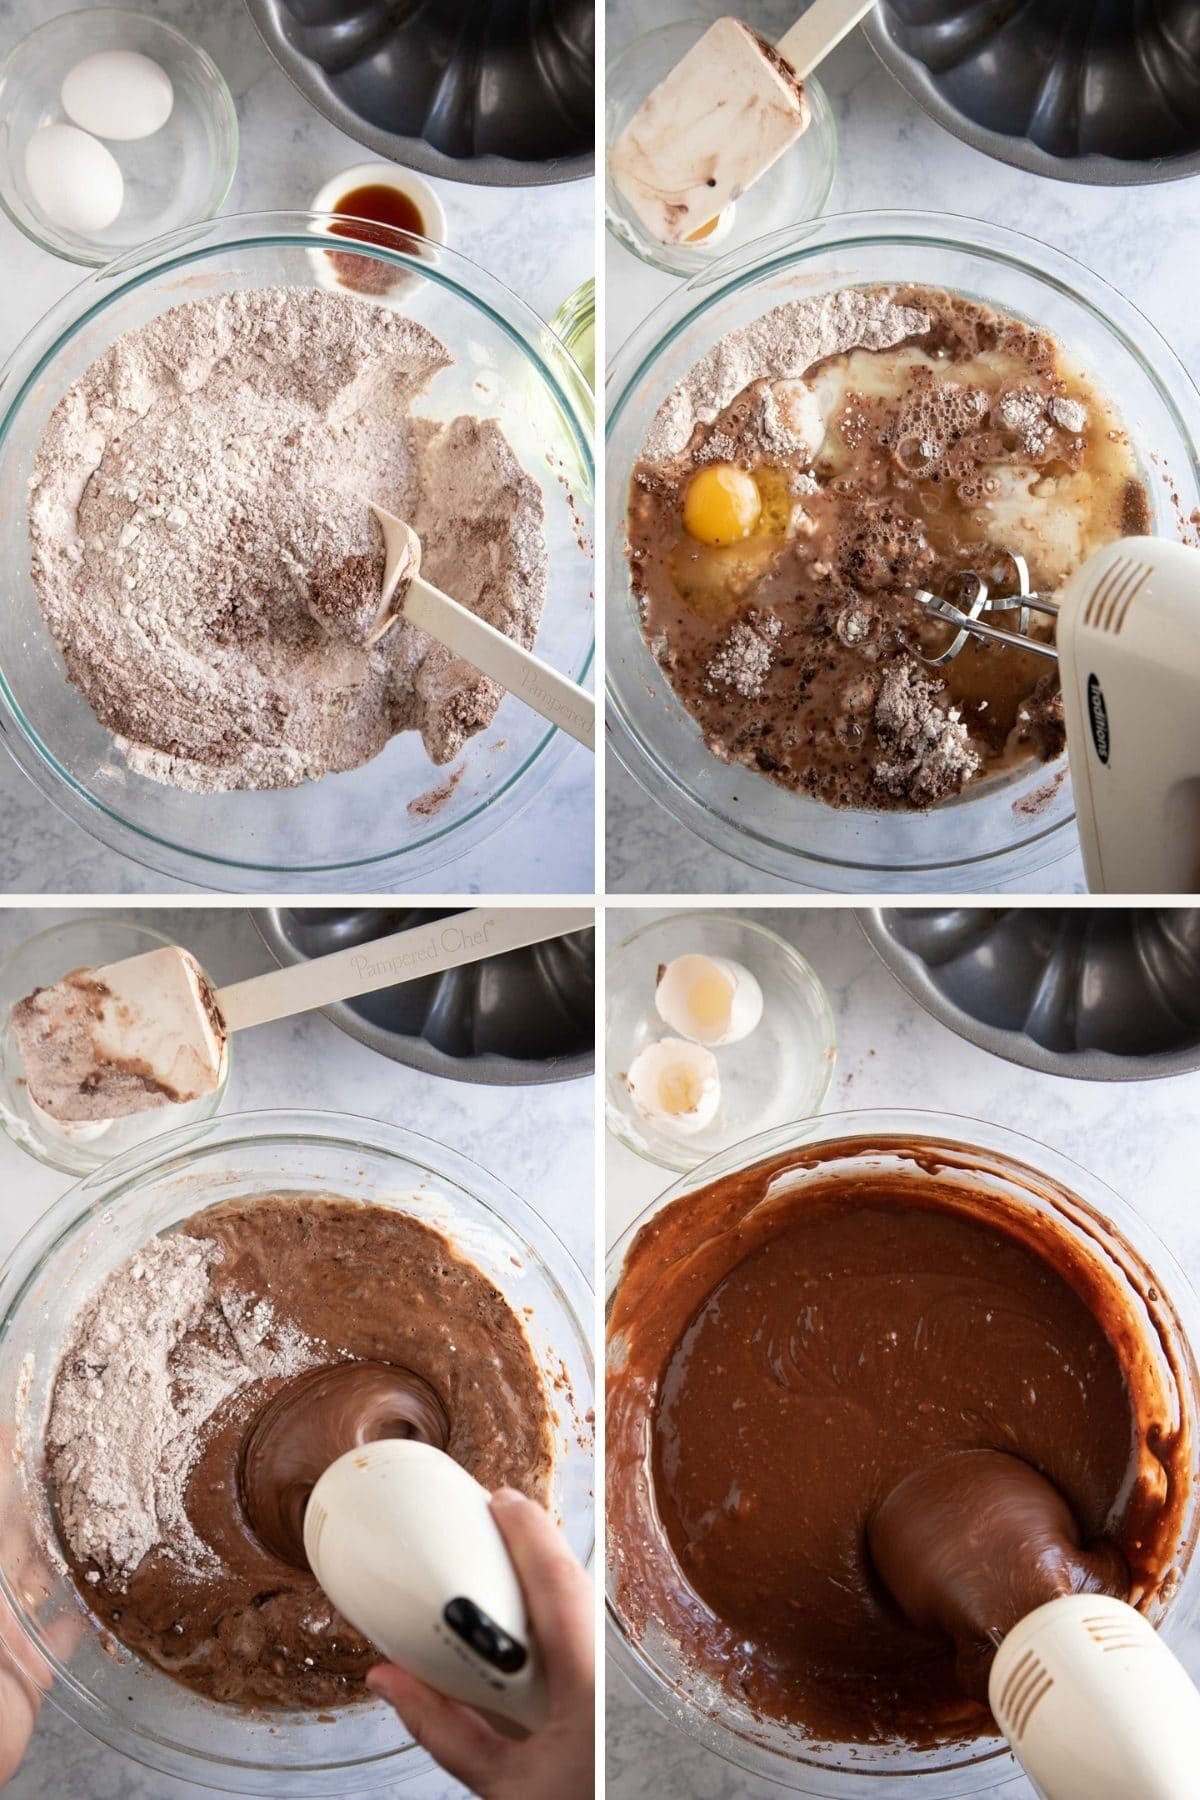 step by step photos showing chocolate bundt cake batter being made